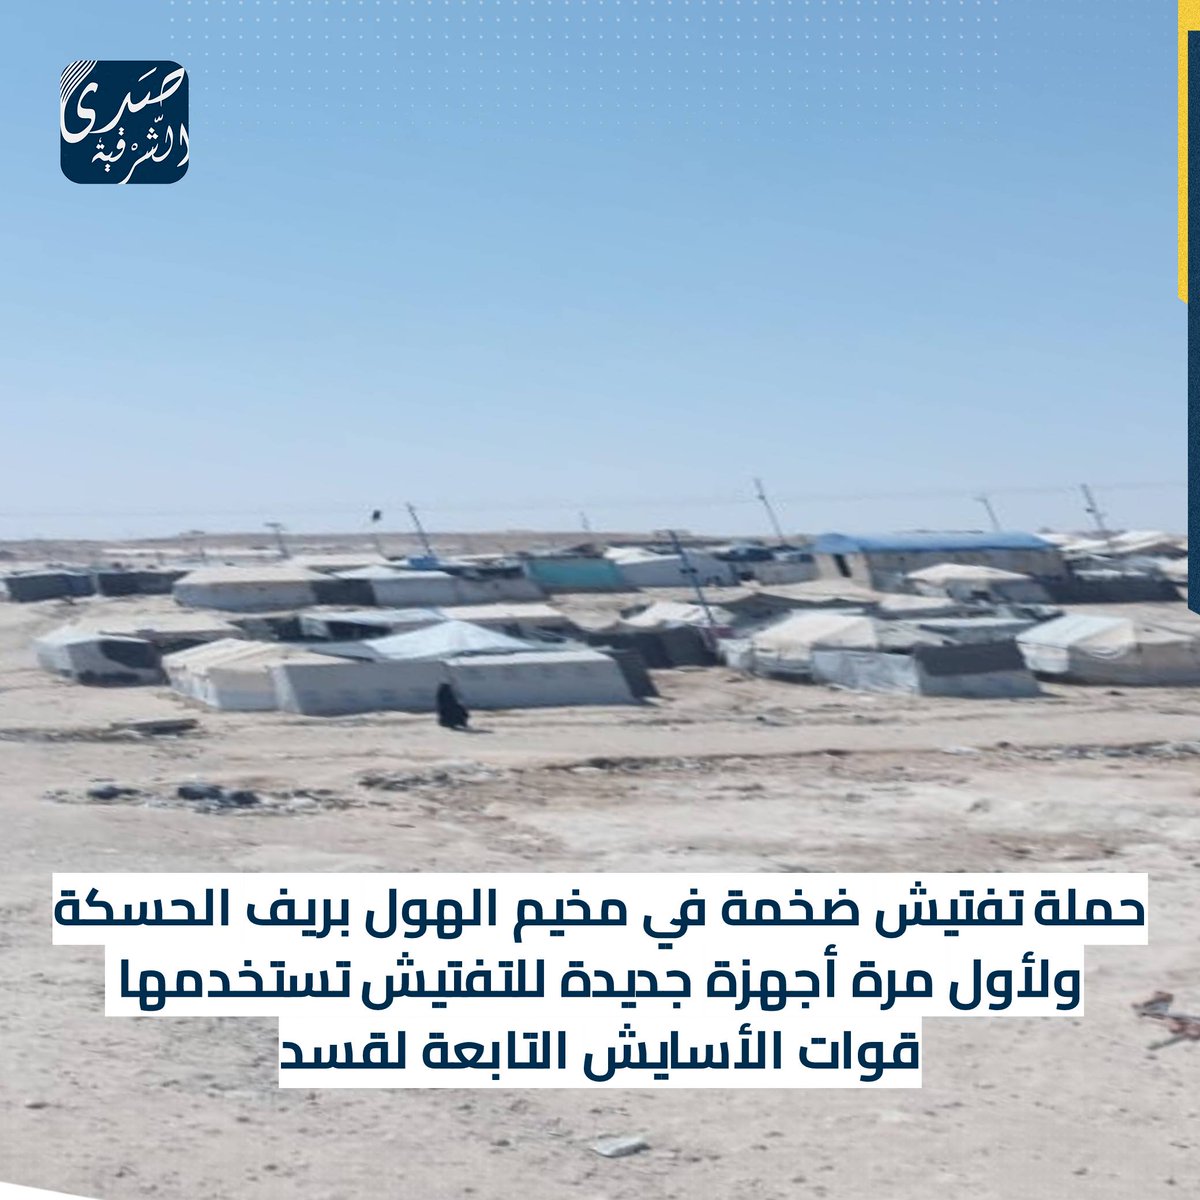 It was reported that the Asayish forces began their campaign Thursday morning with the first visa for the Iraqi refugees in the al-Hol camp, and they took each family out of their tent and photographed the tent and the family in which they lived.